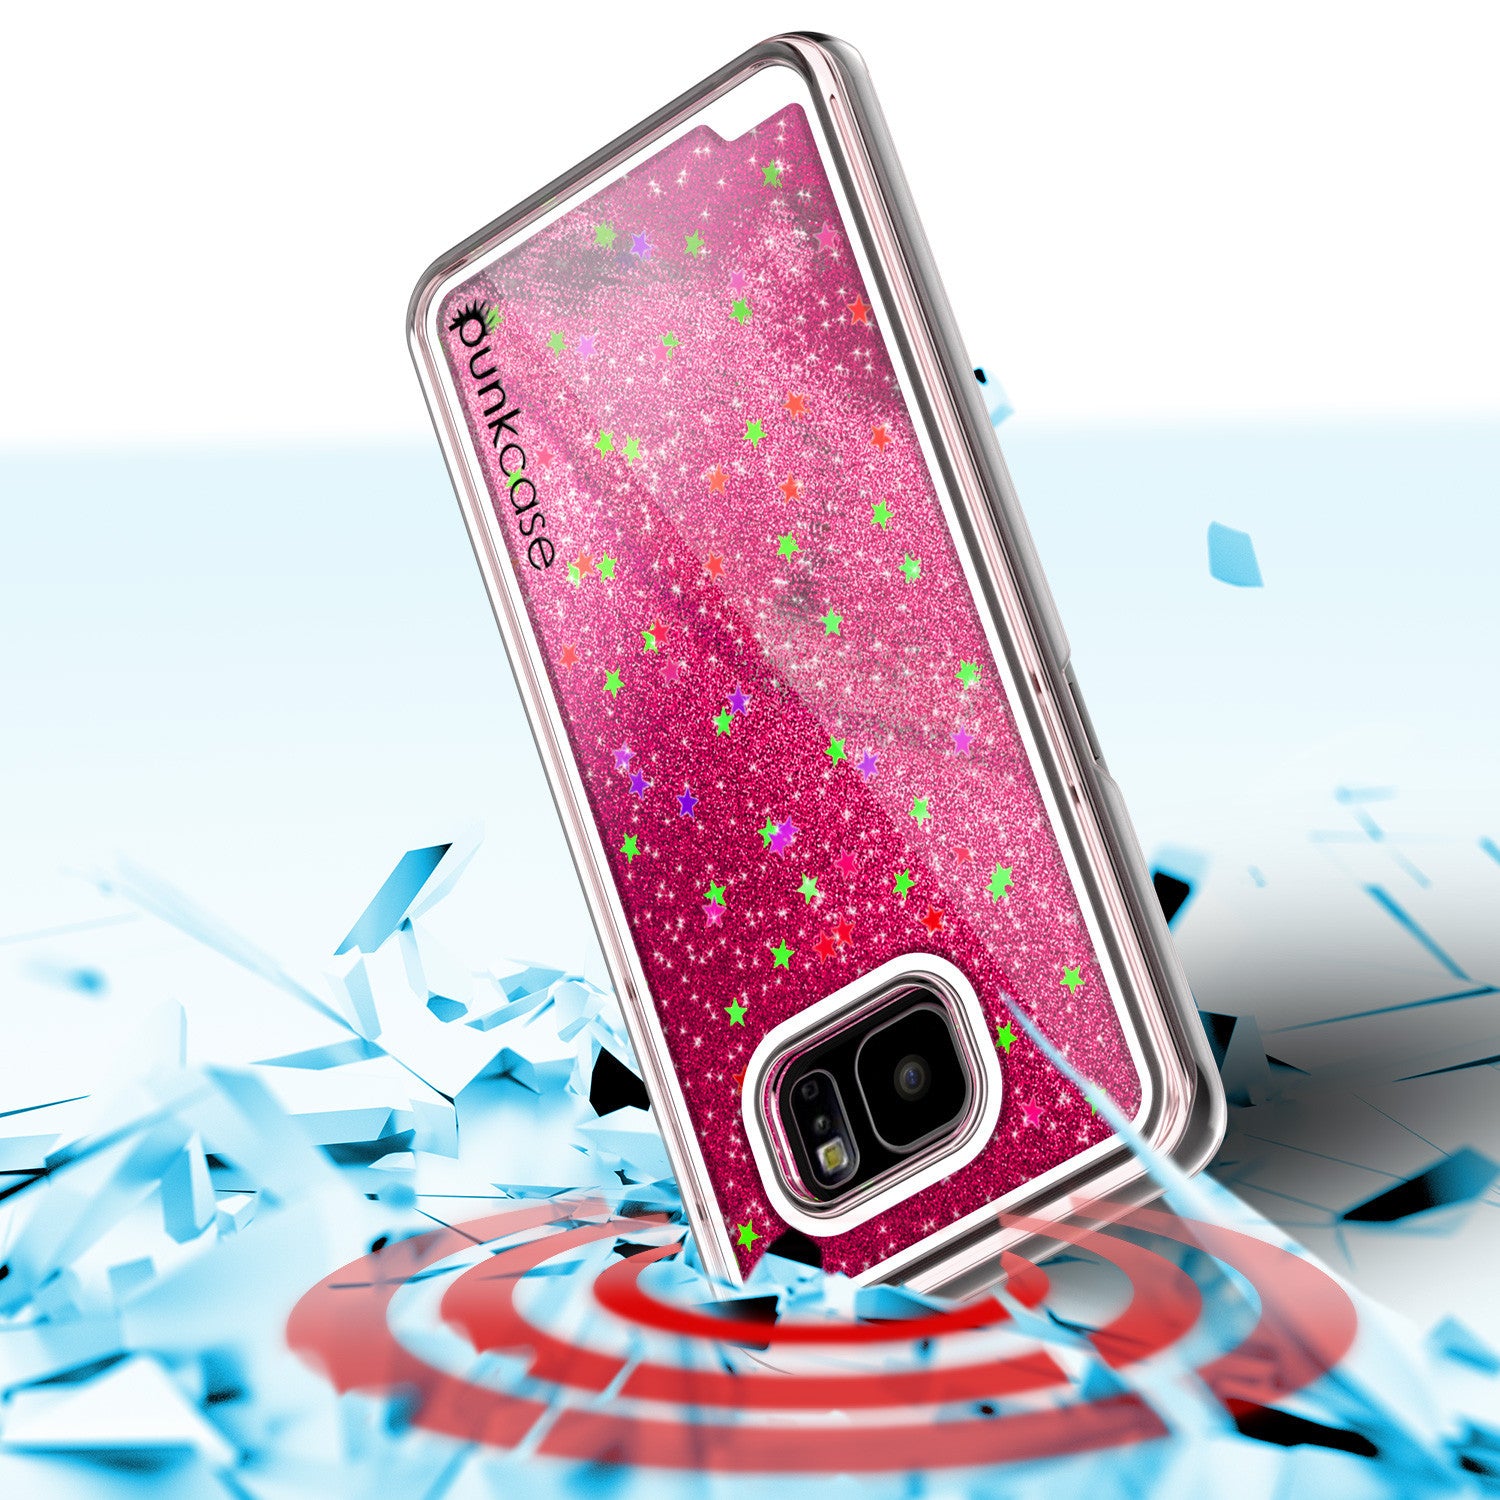 Samsung Galaxy S7 Edge Case, Punkcase [Liquid Pink Series] Protective Dual Layer Floating Glitter Cover + PunkShield Screen Protector